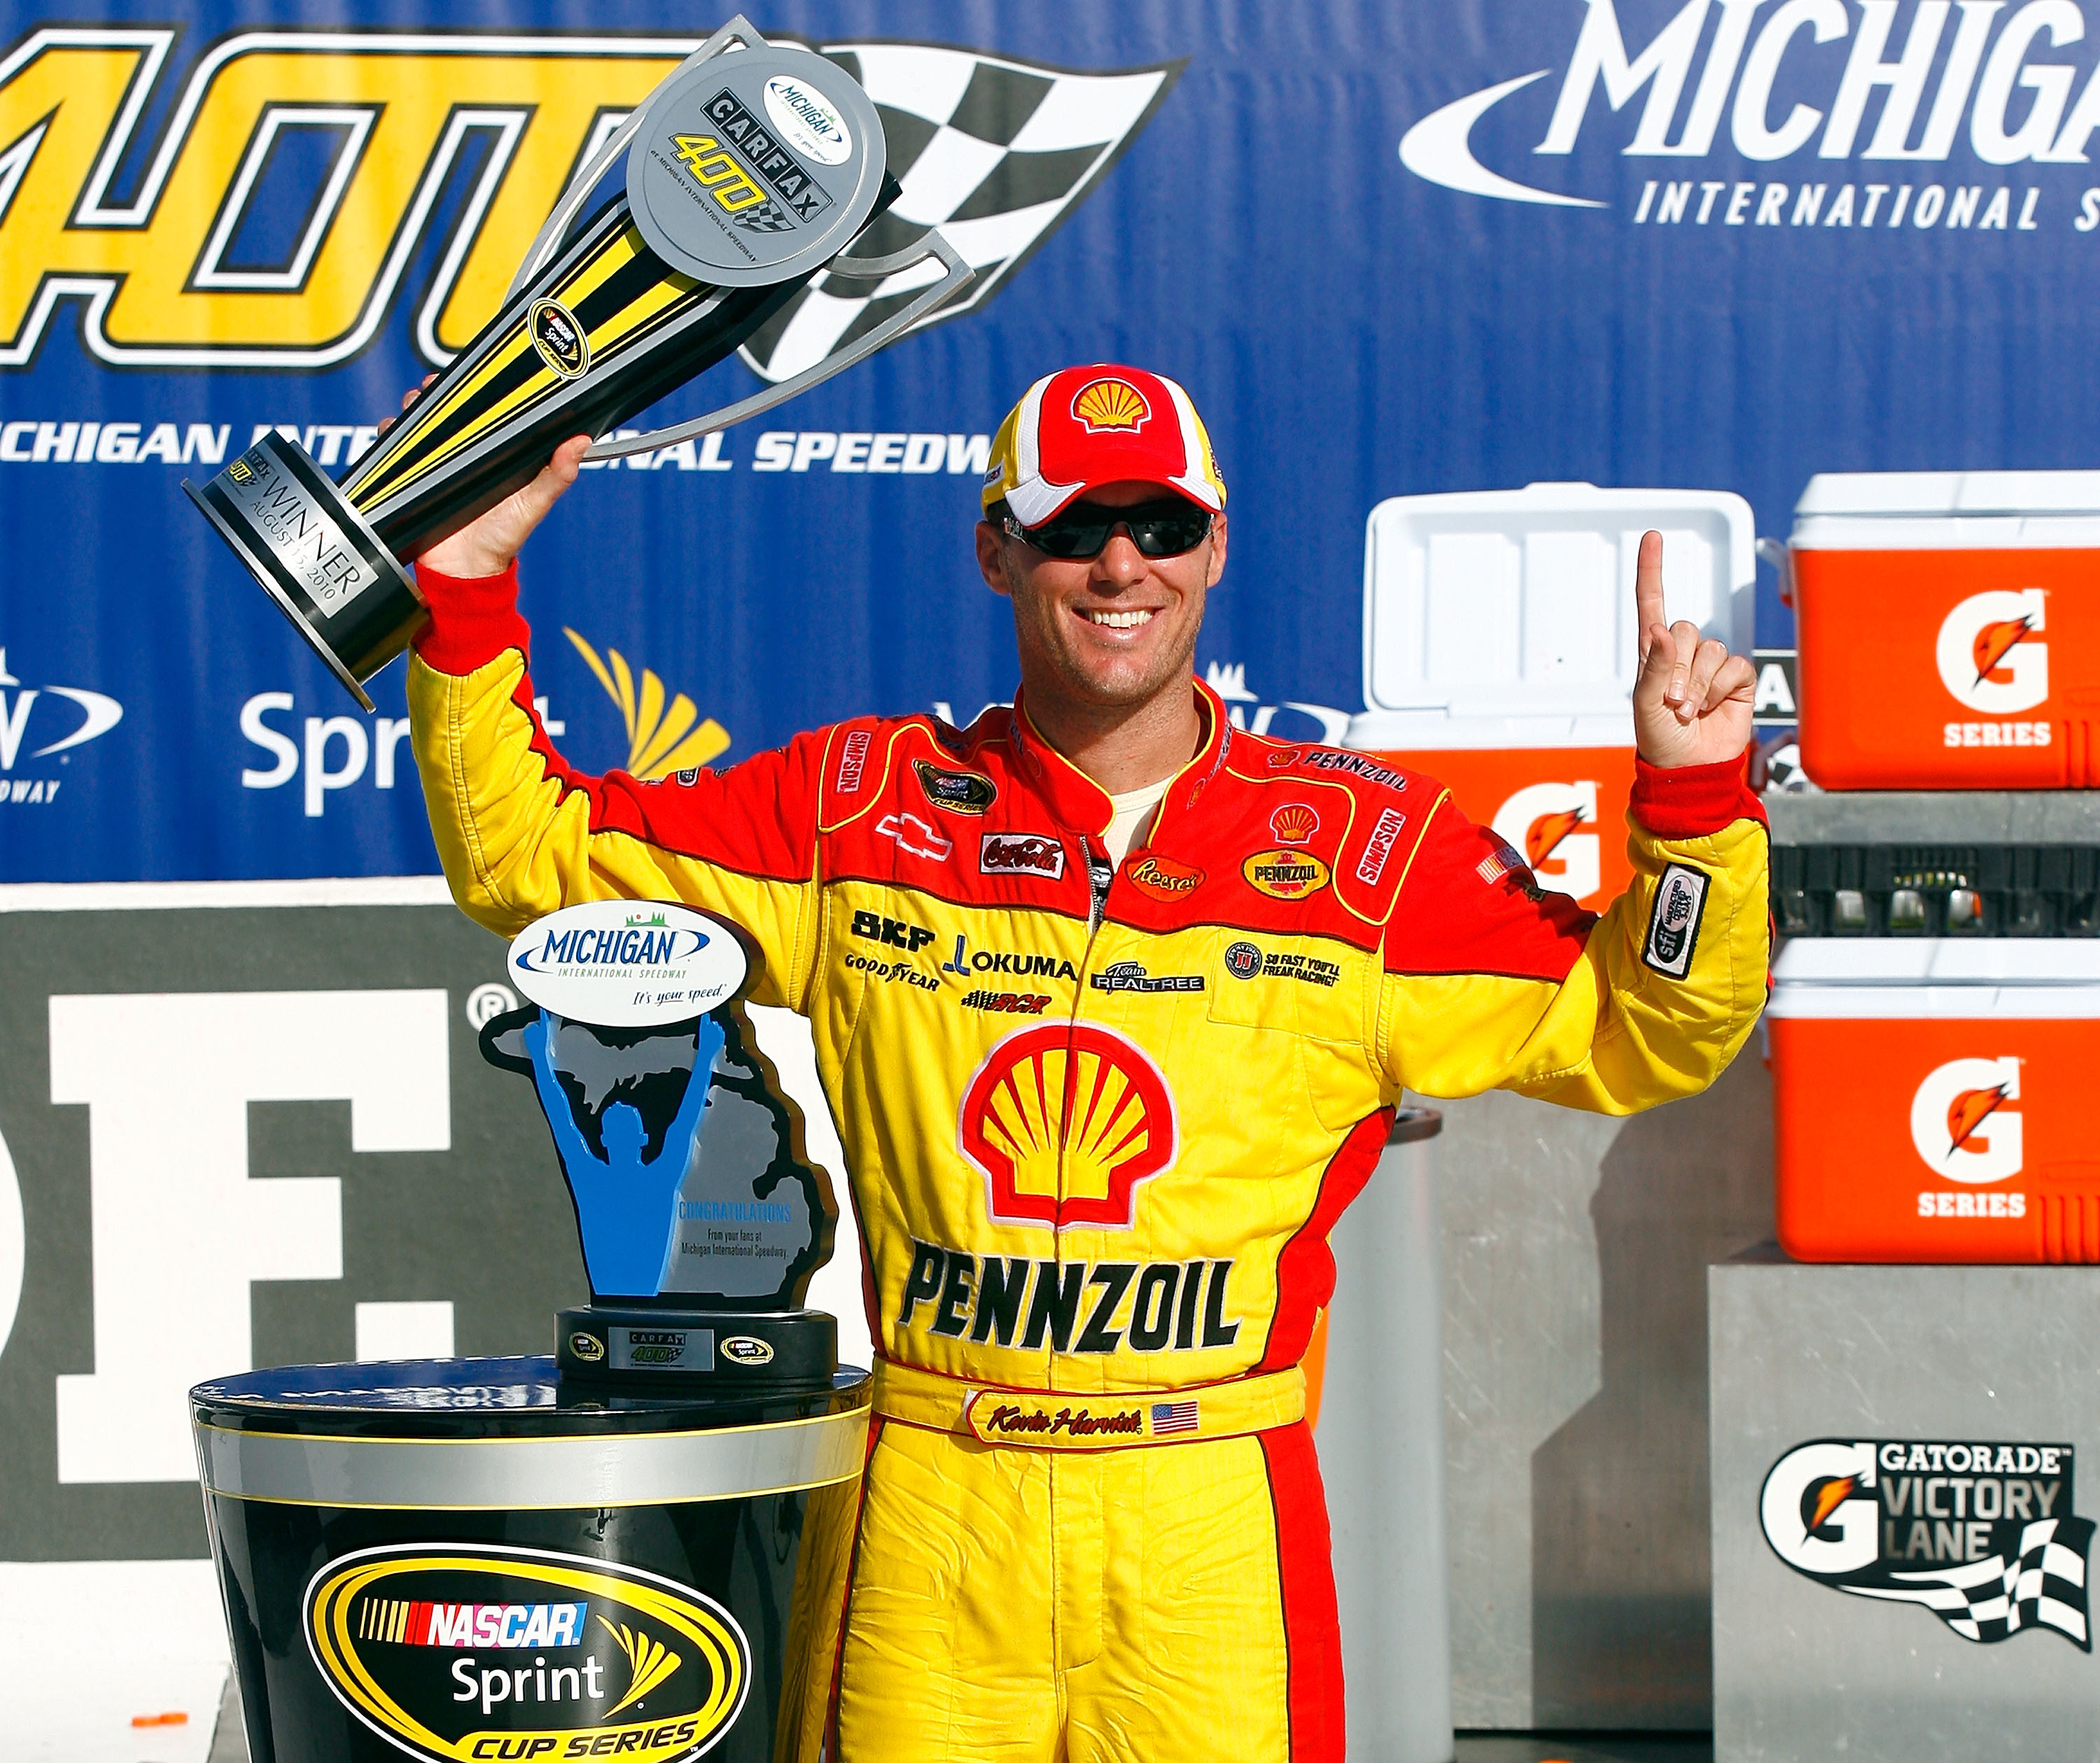 BROOKLYN, MI - AUGUST 15:  Kevin Harvick, driver of the #29 Shell/Pennzoil Chevrolet, celebrates with the trophy in victory lane after winning the NASCAR Sprint Cup Series CARFAX 400 at Michigan International Speedway on August 15, 2010 in Brooklyn, Michi